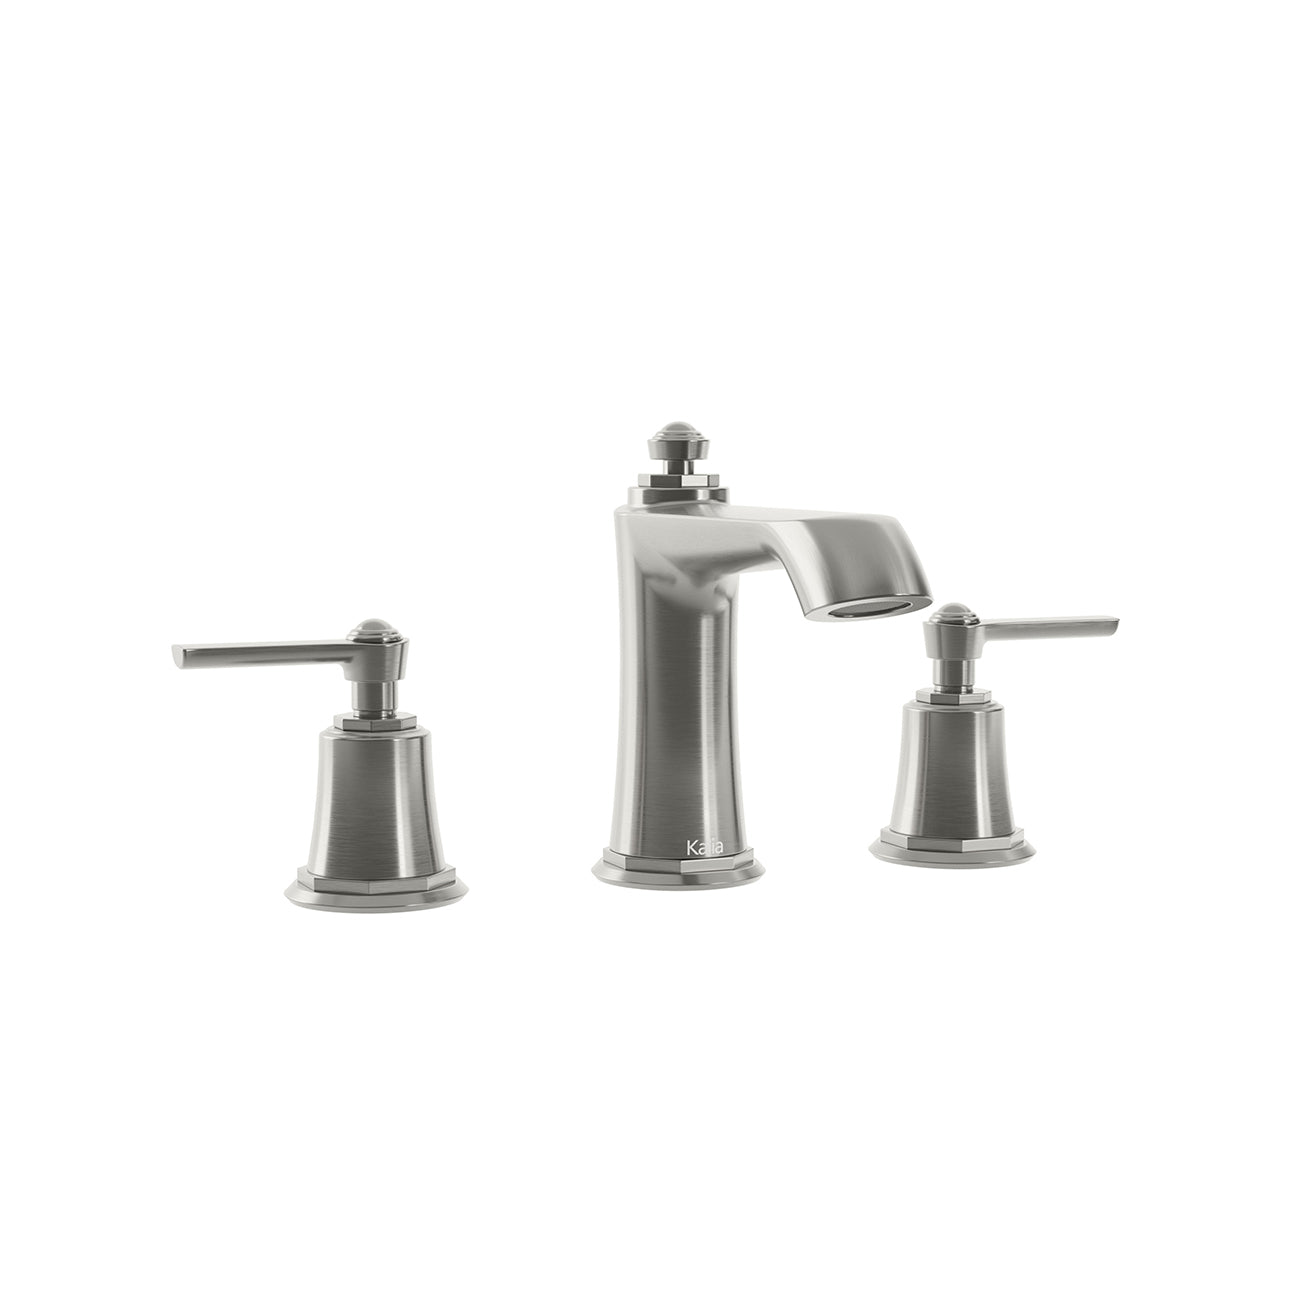 Kalia RUSTIK 5.5" Widespread Lavatory Bathroom Faucet Without Drain (BF1484)